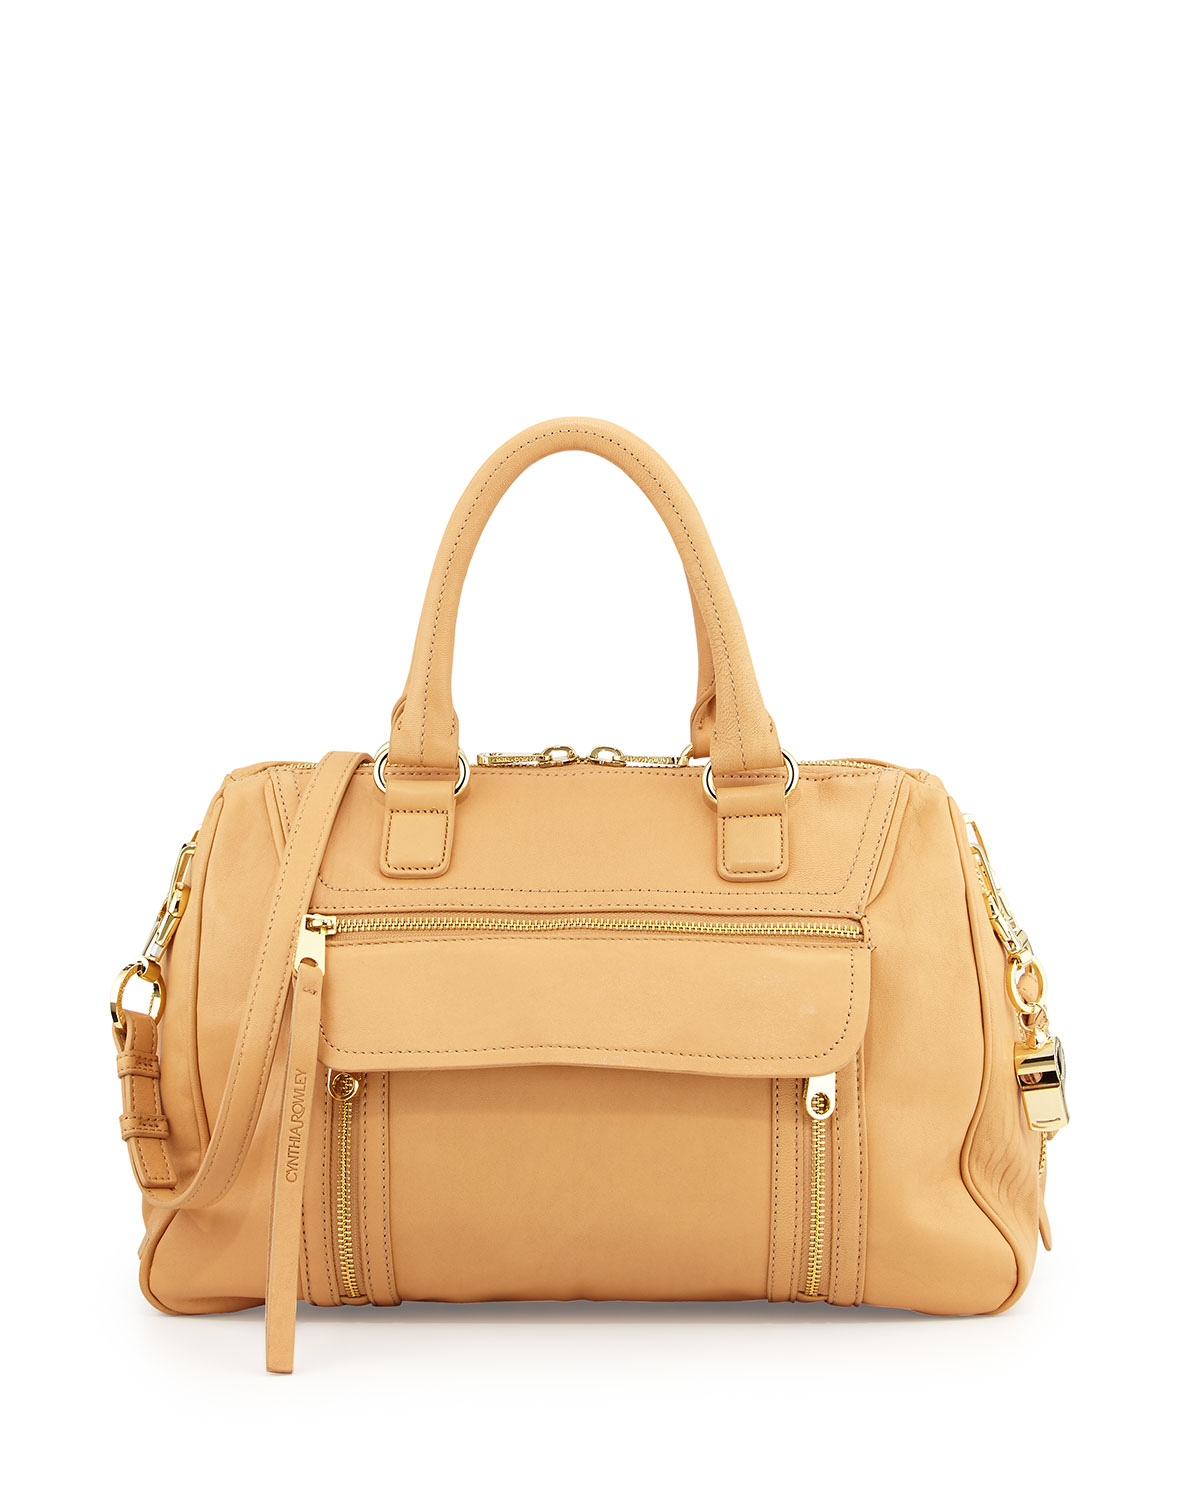 Cynthia rowley Reece Leather Satchel Bag in Natural | Lyst